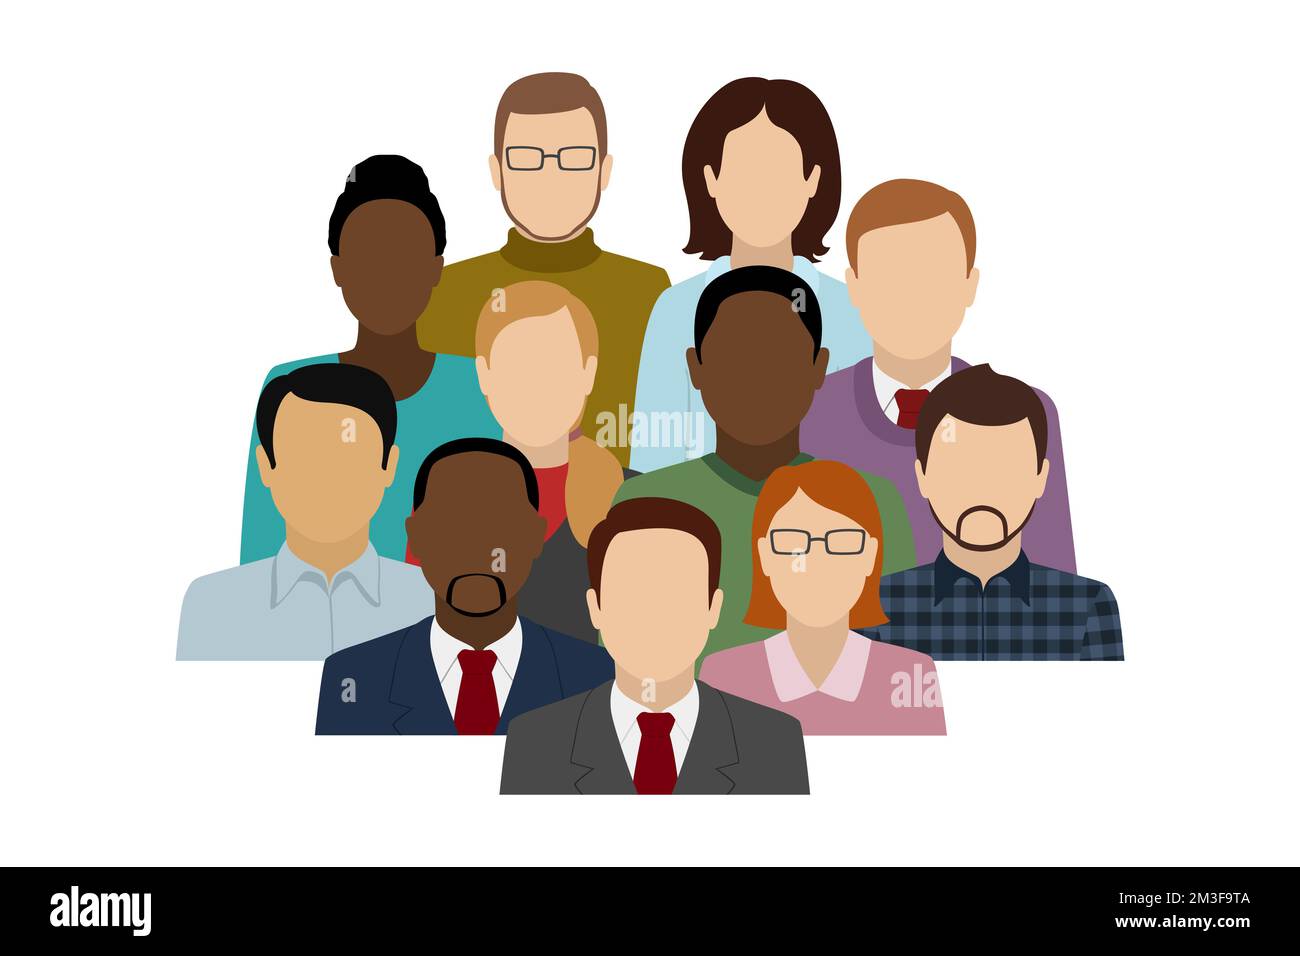 Group of different people. Office team. Vector illustration. Stock Vector